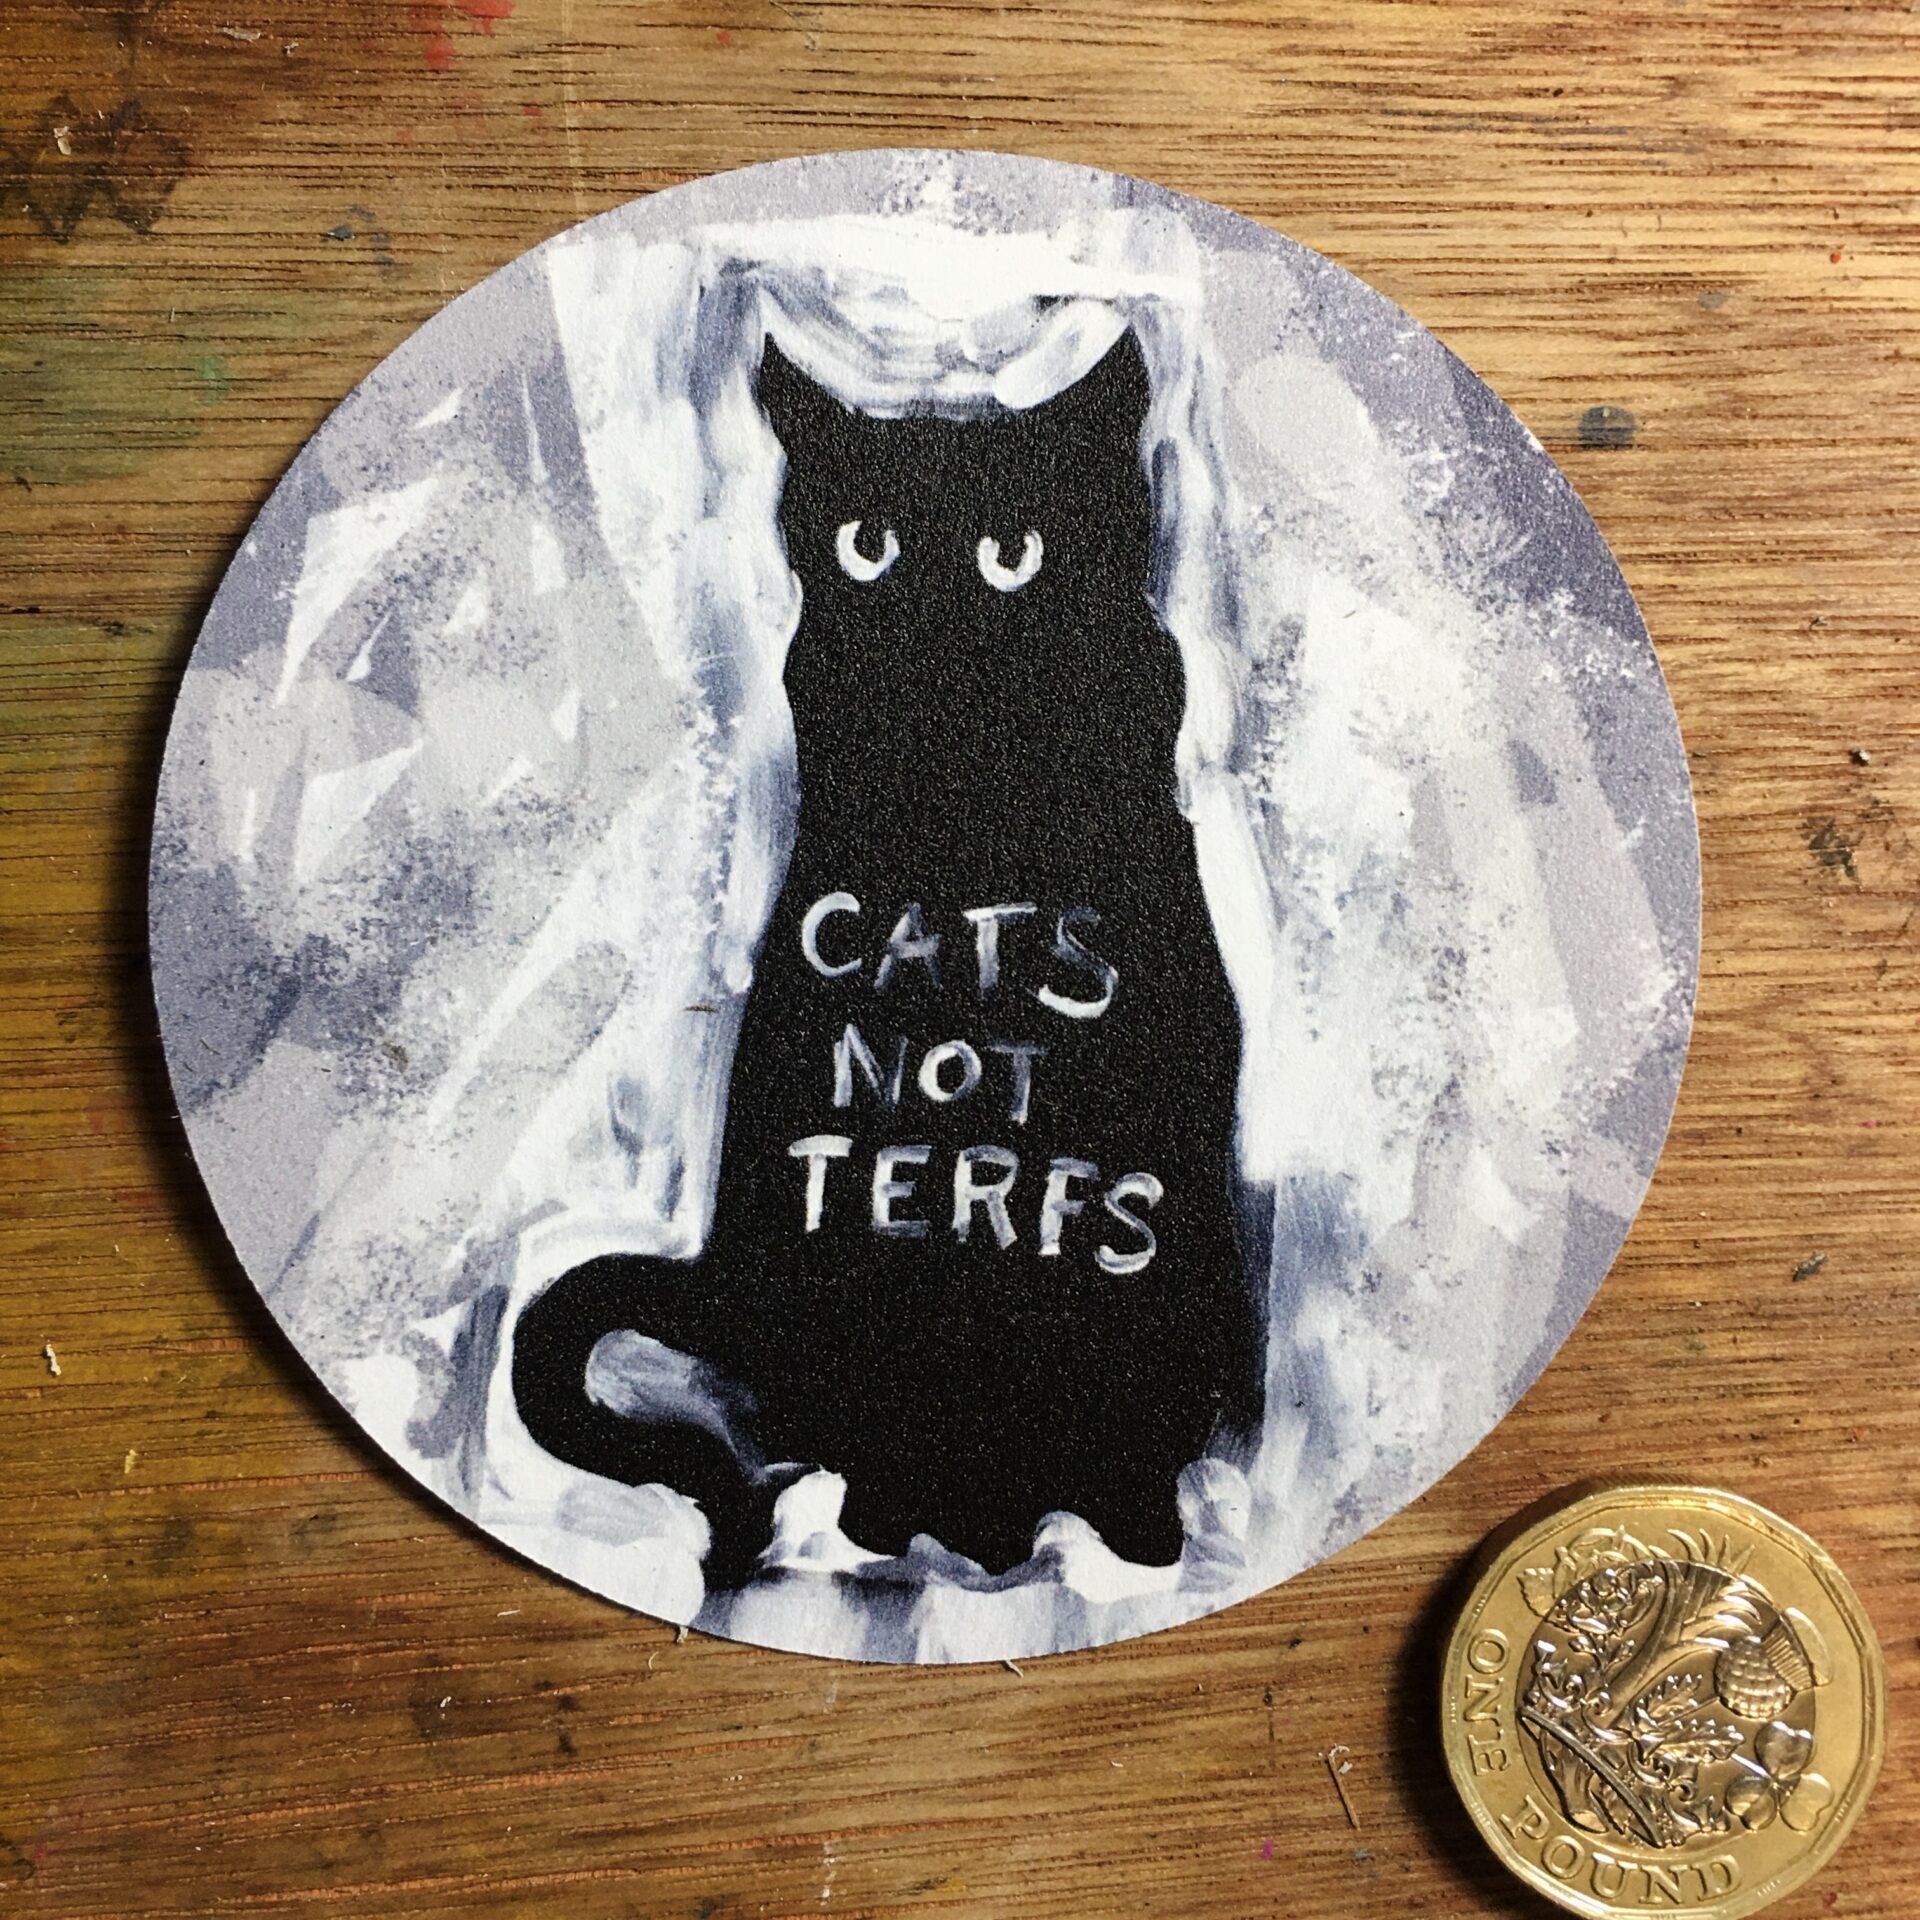 round sticker with black cat image. On the black cat it is written CATS NOT TERFS.